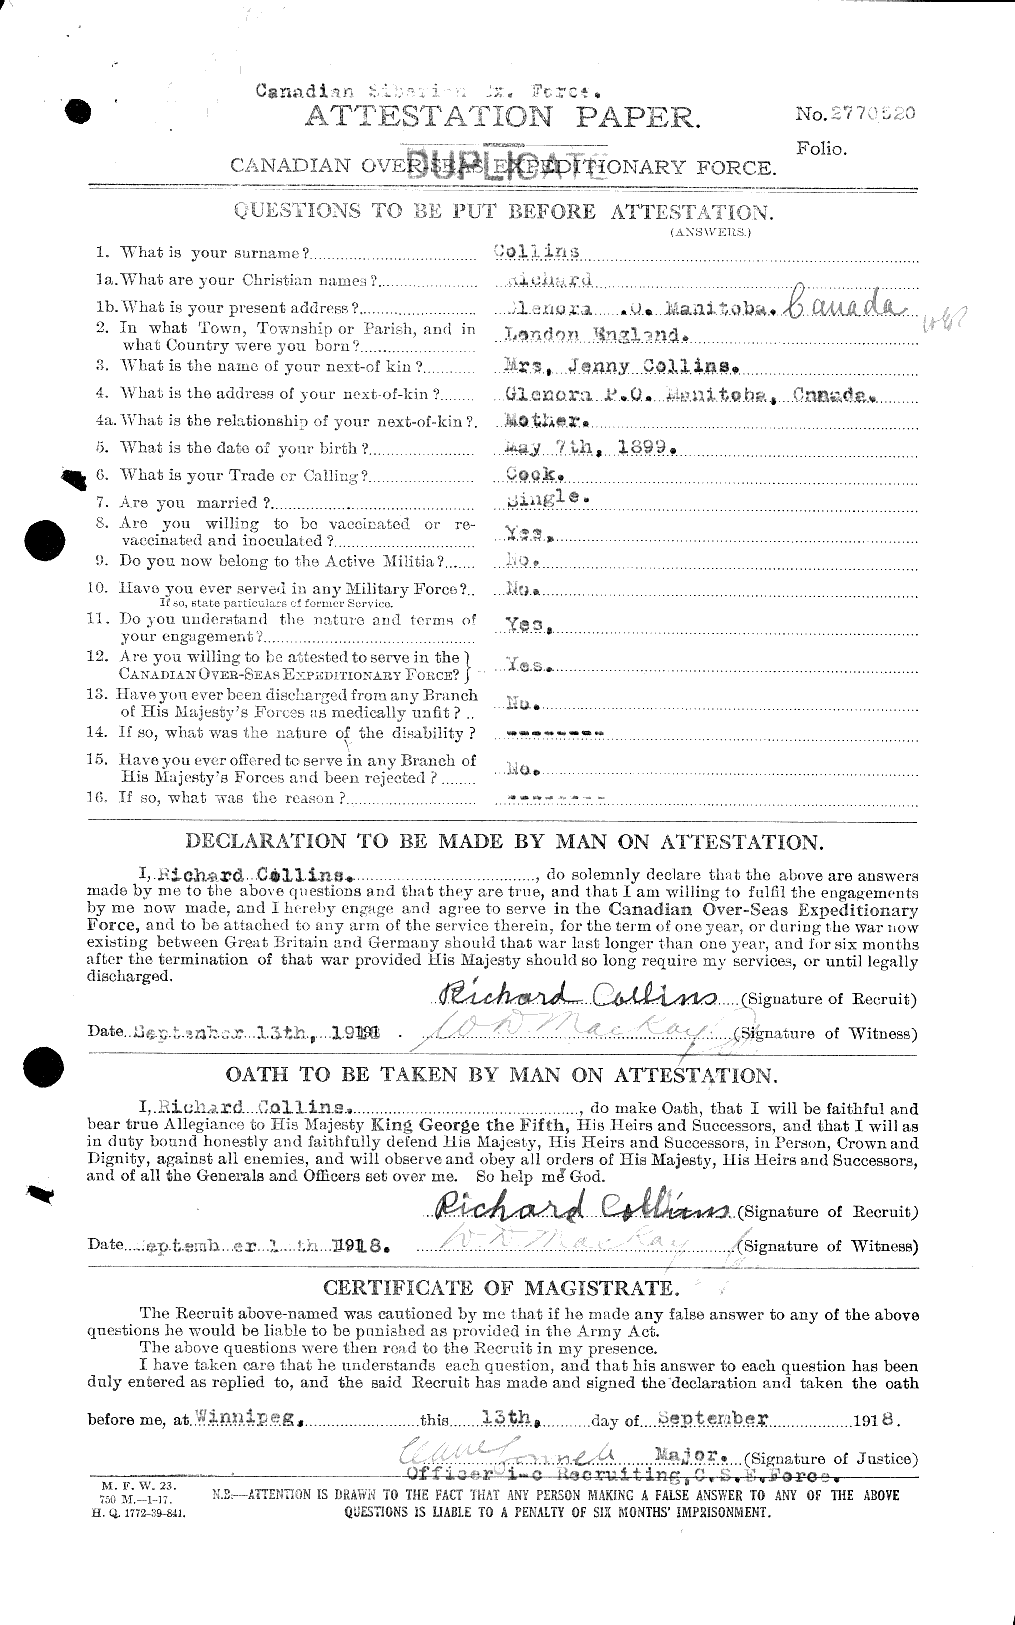 Personnel Records of the First World War - CEF 034515a